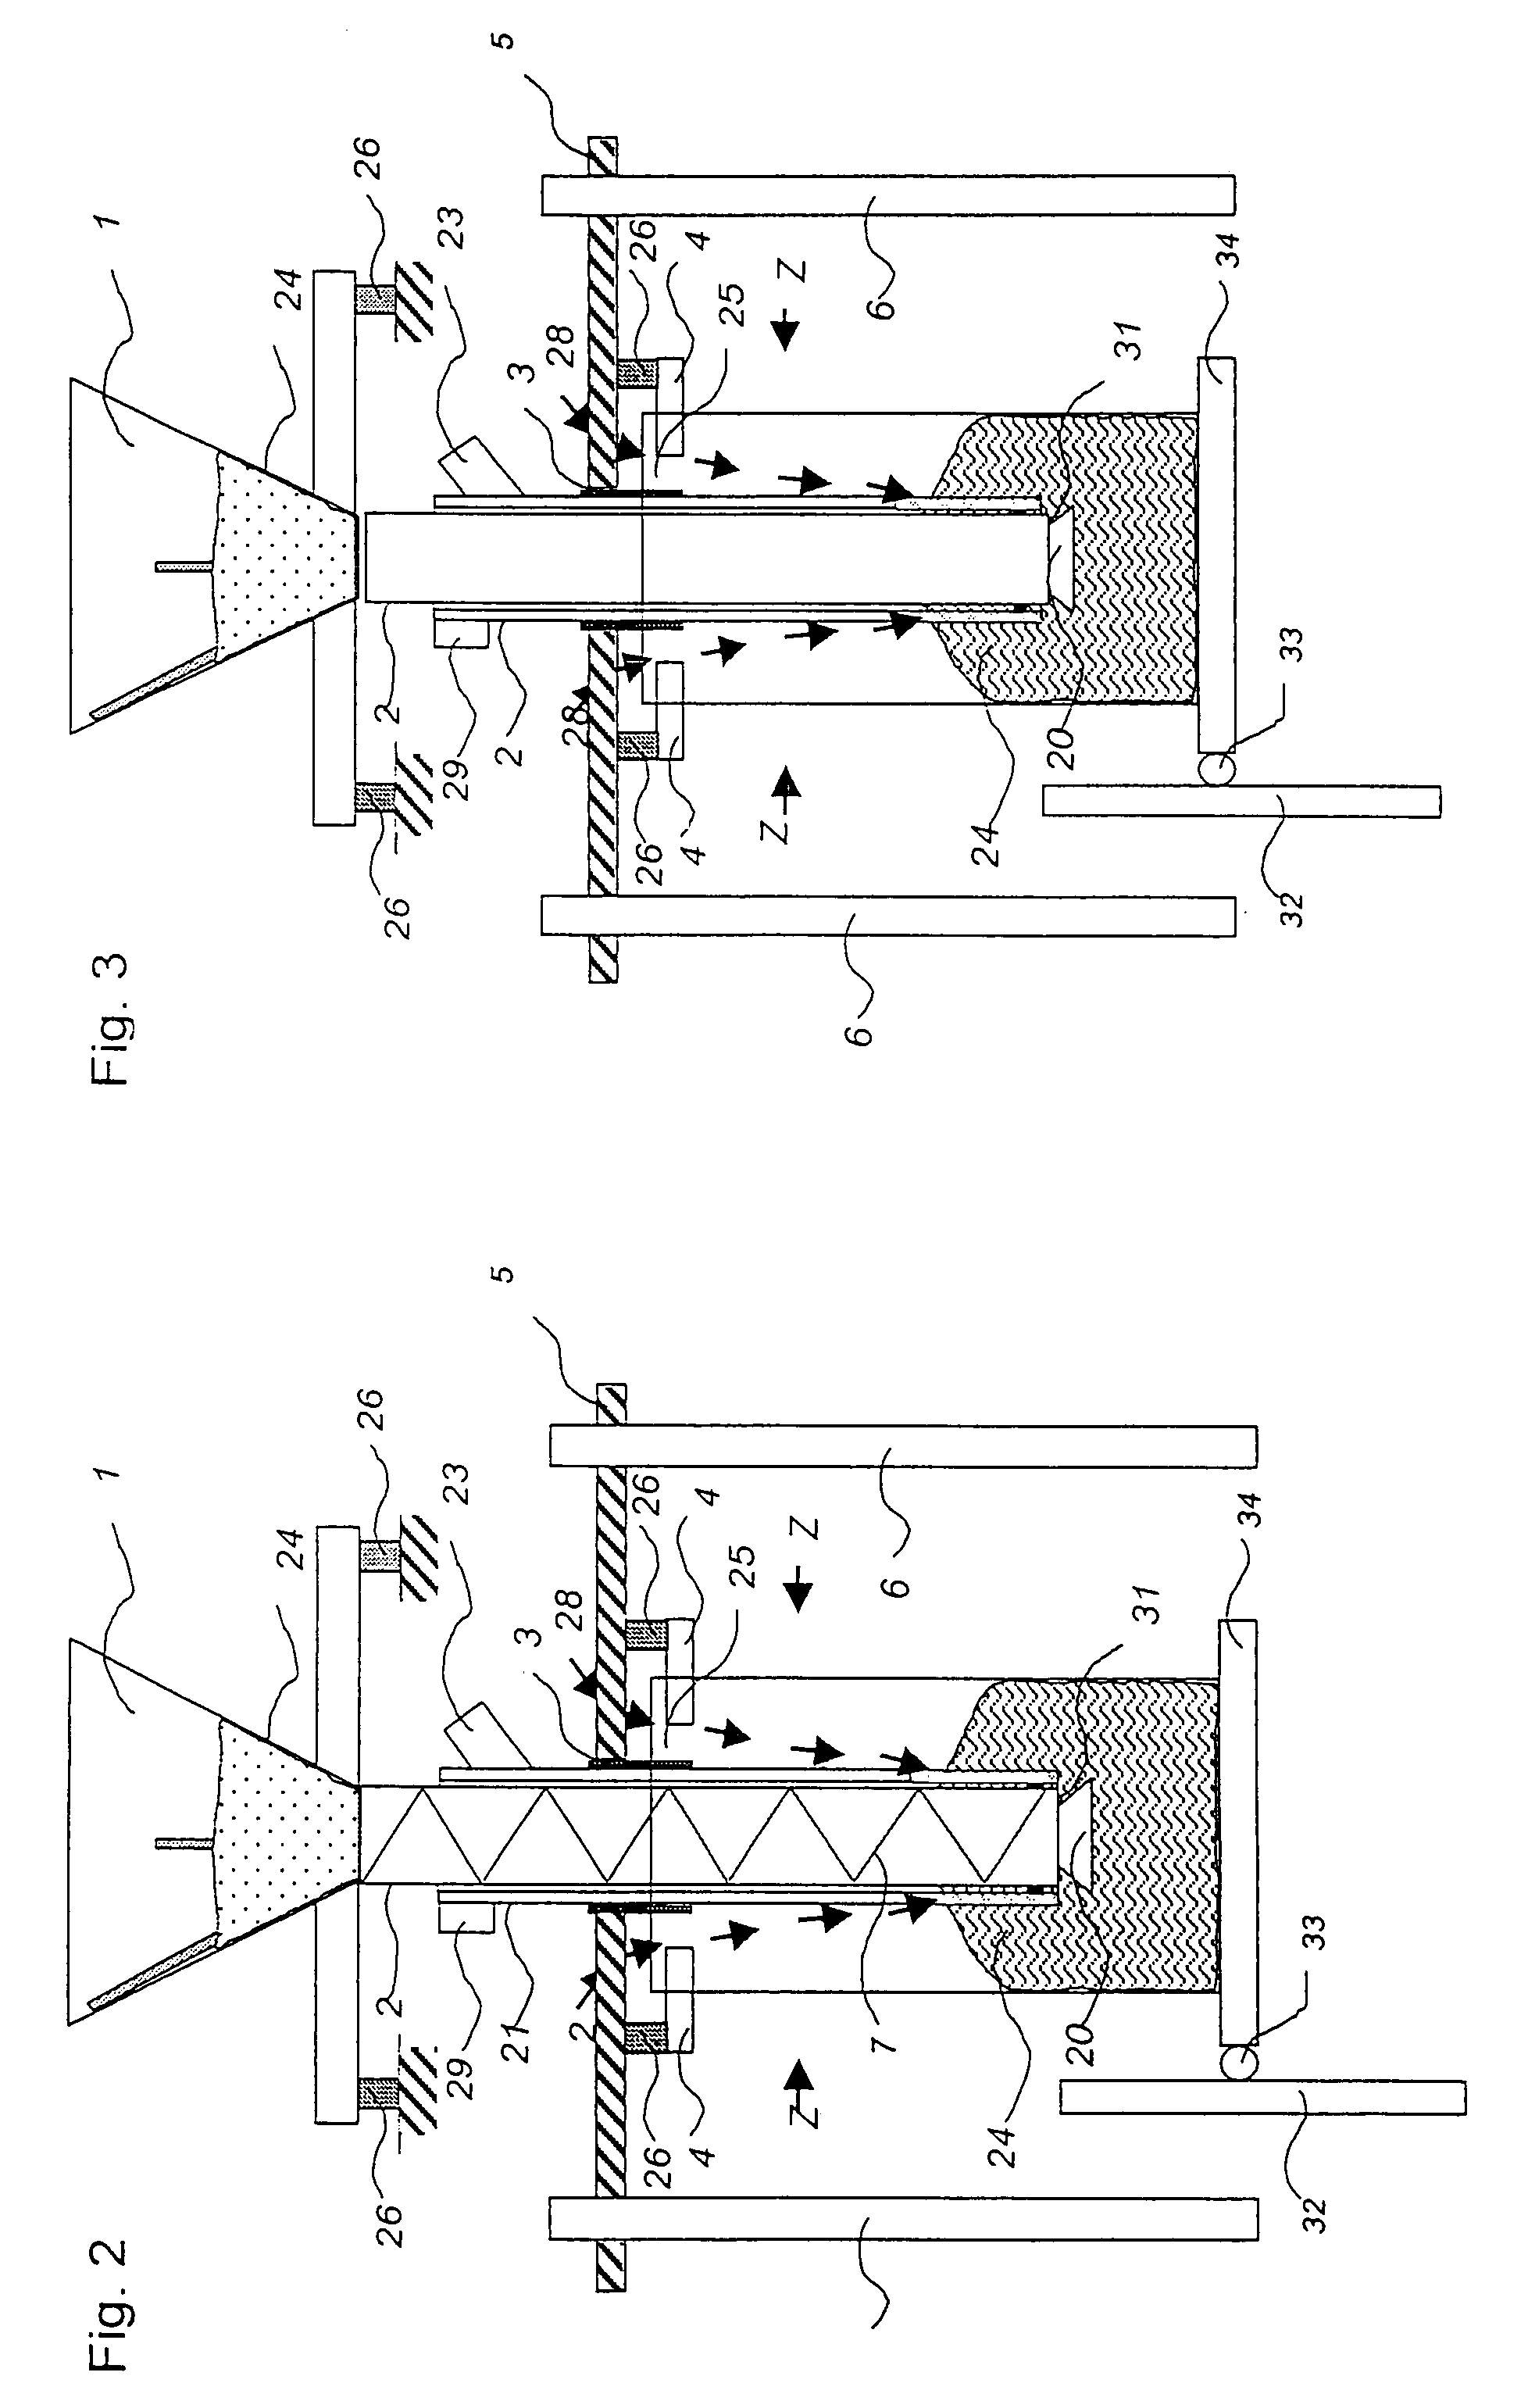 Machine for forming, filling and closing bags with a bag lifting device